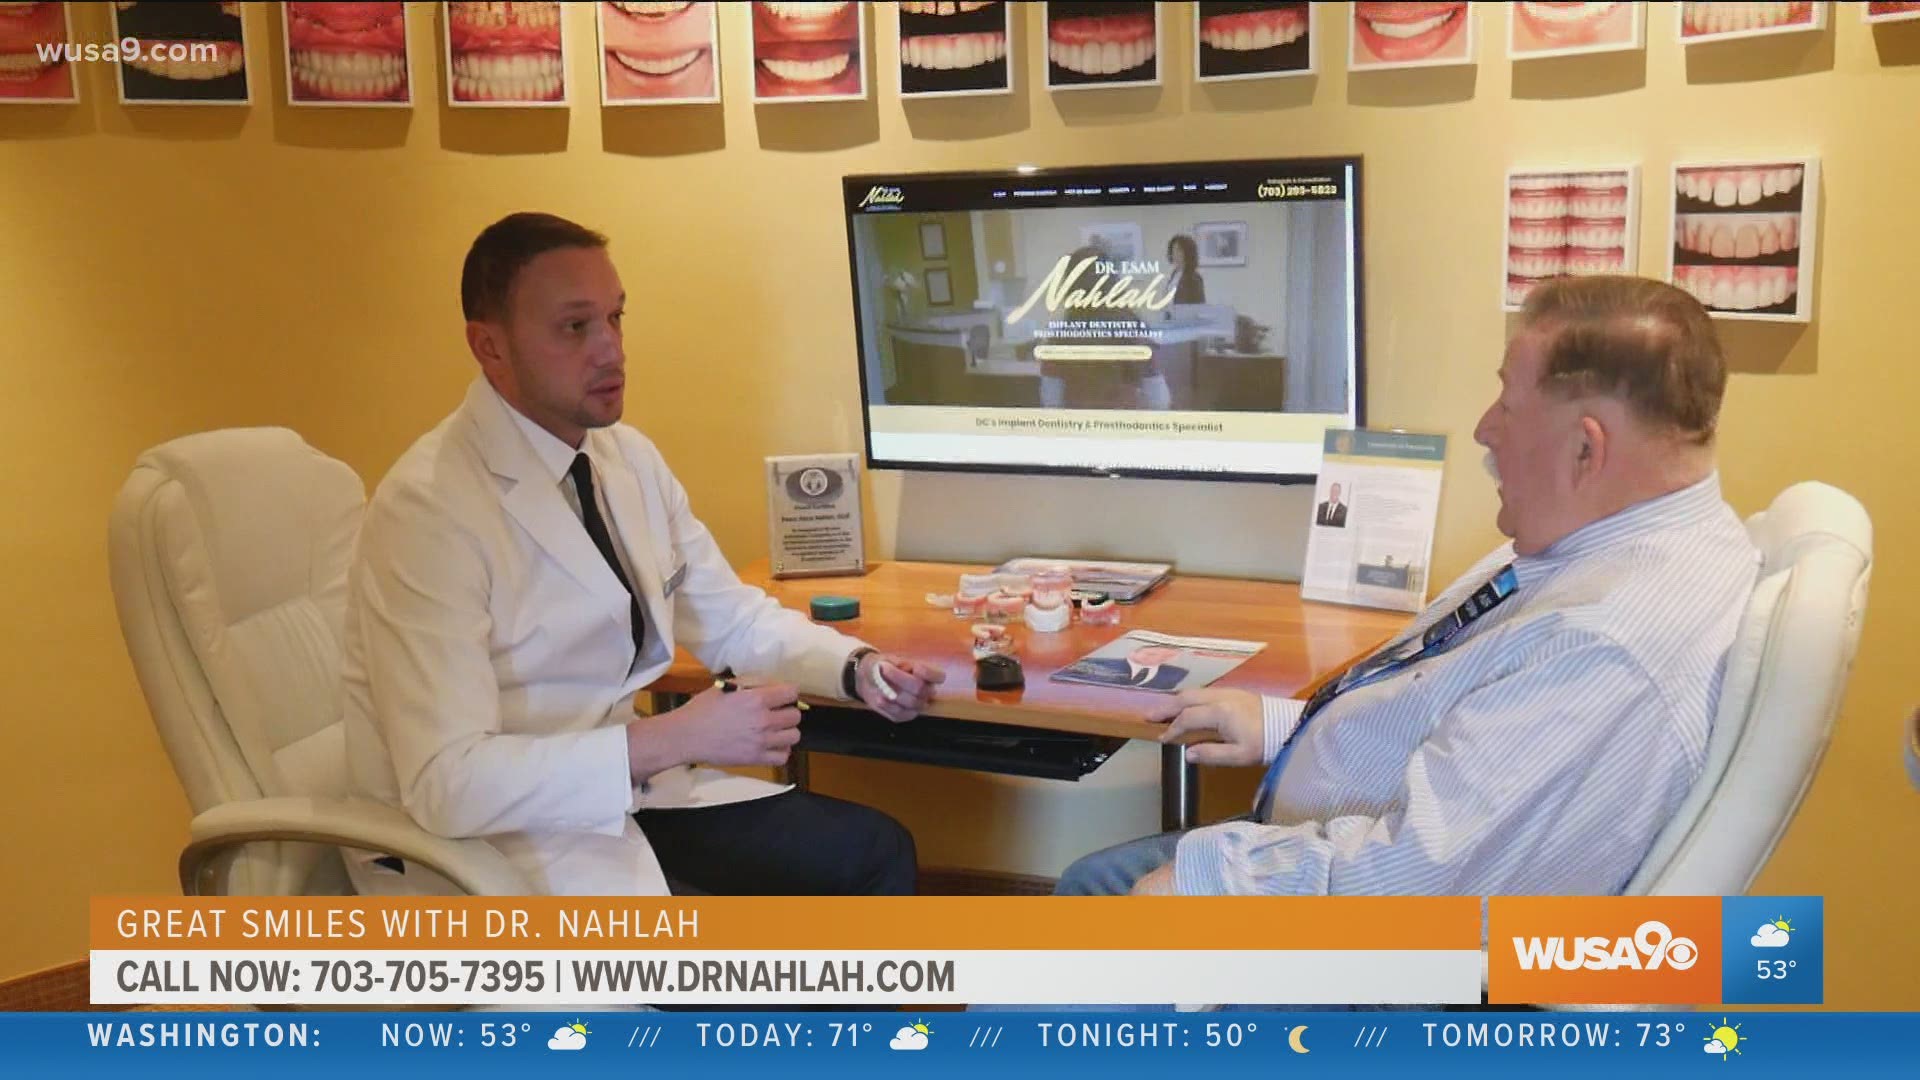 Meet a man who felt healthy in his life and his relationship after getting a healthy smiles thanks to Dr. Nahlah. Sponsored by Dr. Esam Nahlah, call 703-705-9375.